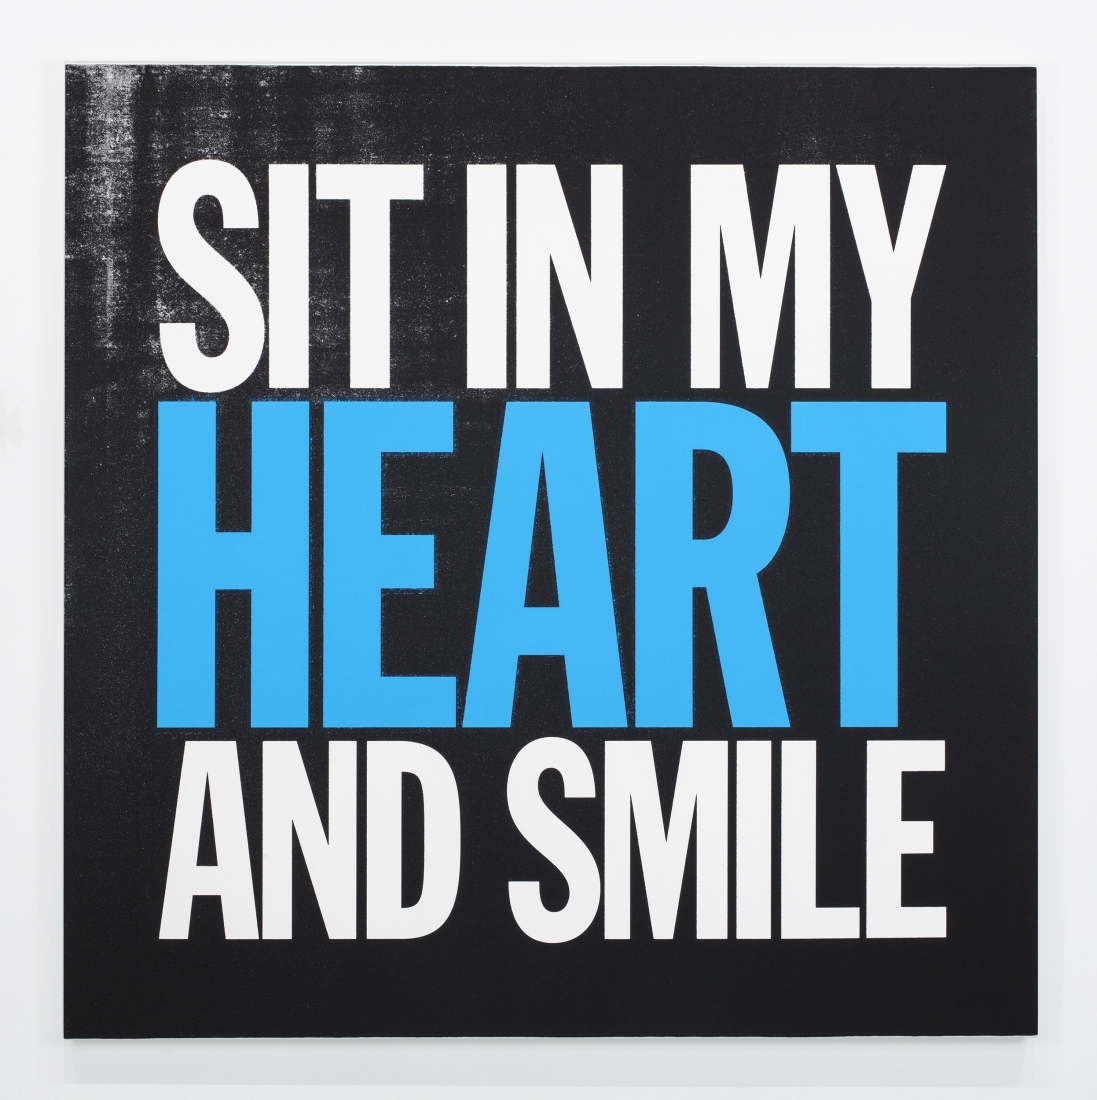 John&nbsp;Giorno
SIT IN MY HEART AND SMILE, 2017
acrylic on canvas
48 x 48 inches (121,9 x 121,9 cm)
SW 21026
&nbsp;